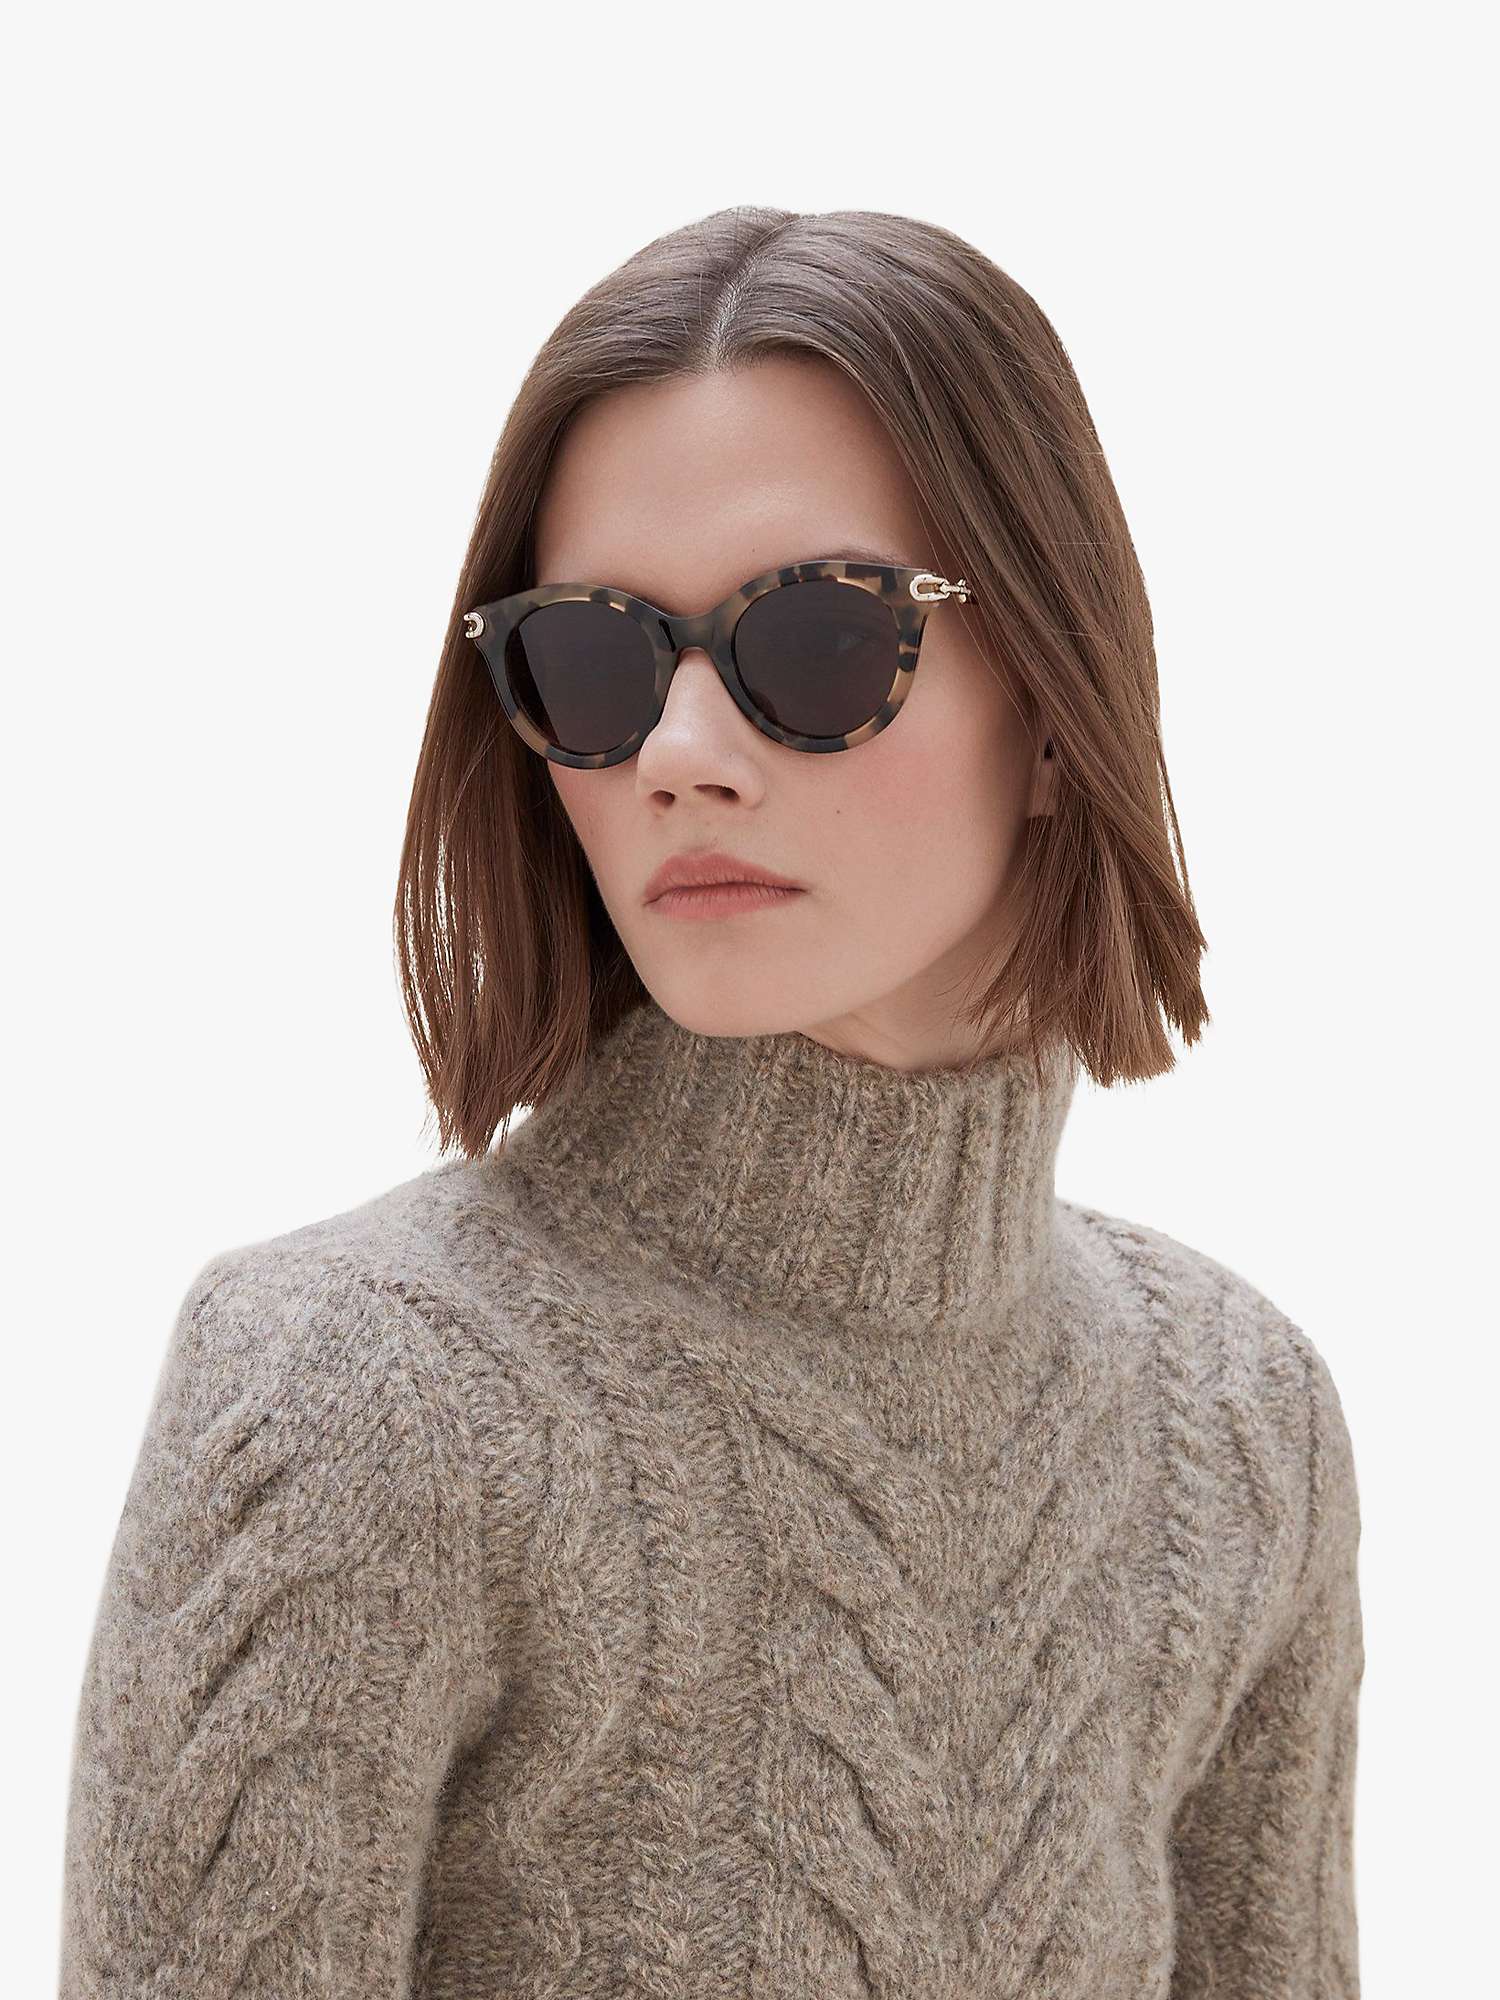 Buy Mulberry Women's Penny Round Sunglasses Online at johnlewis.com